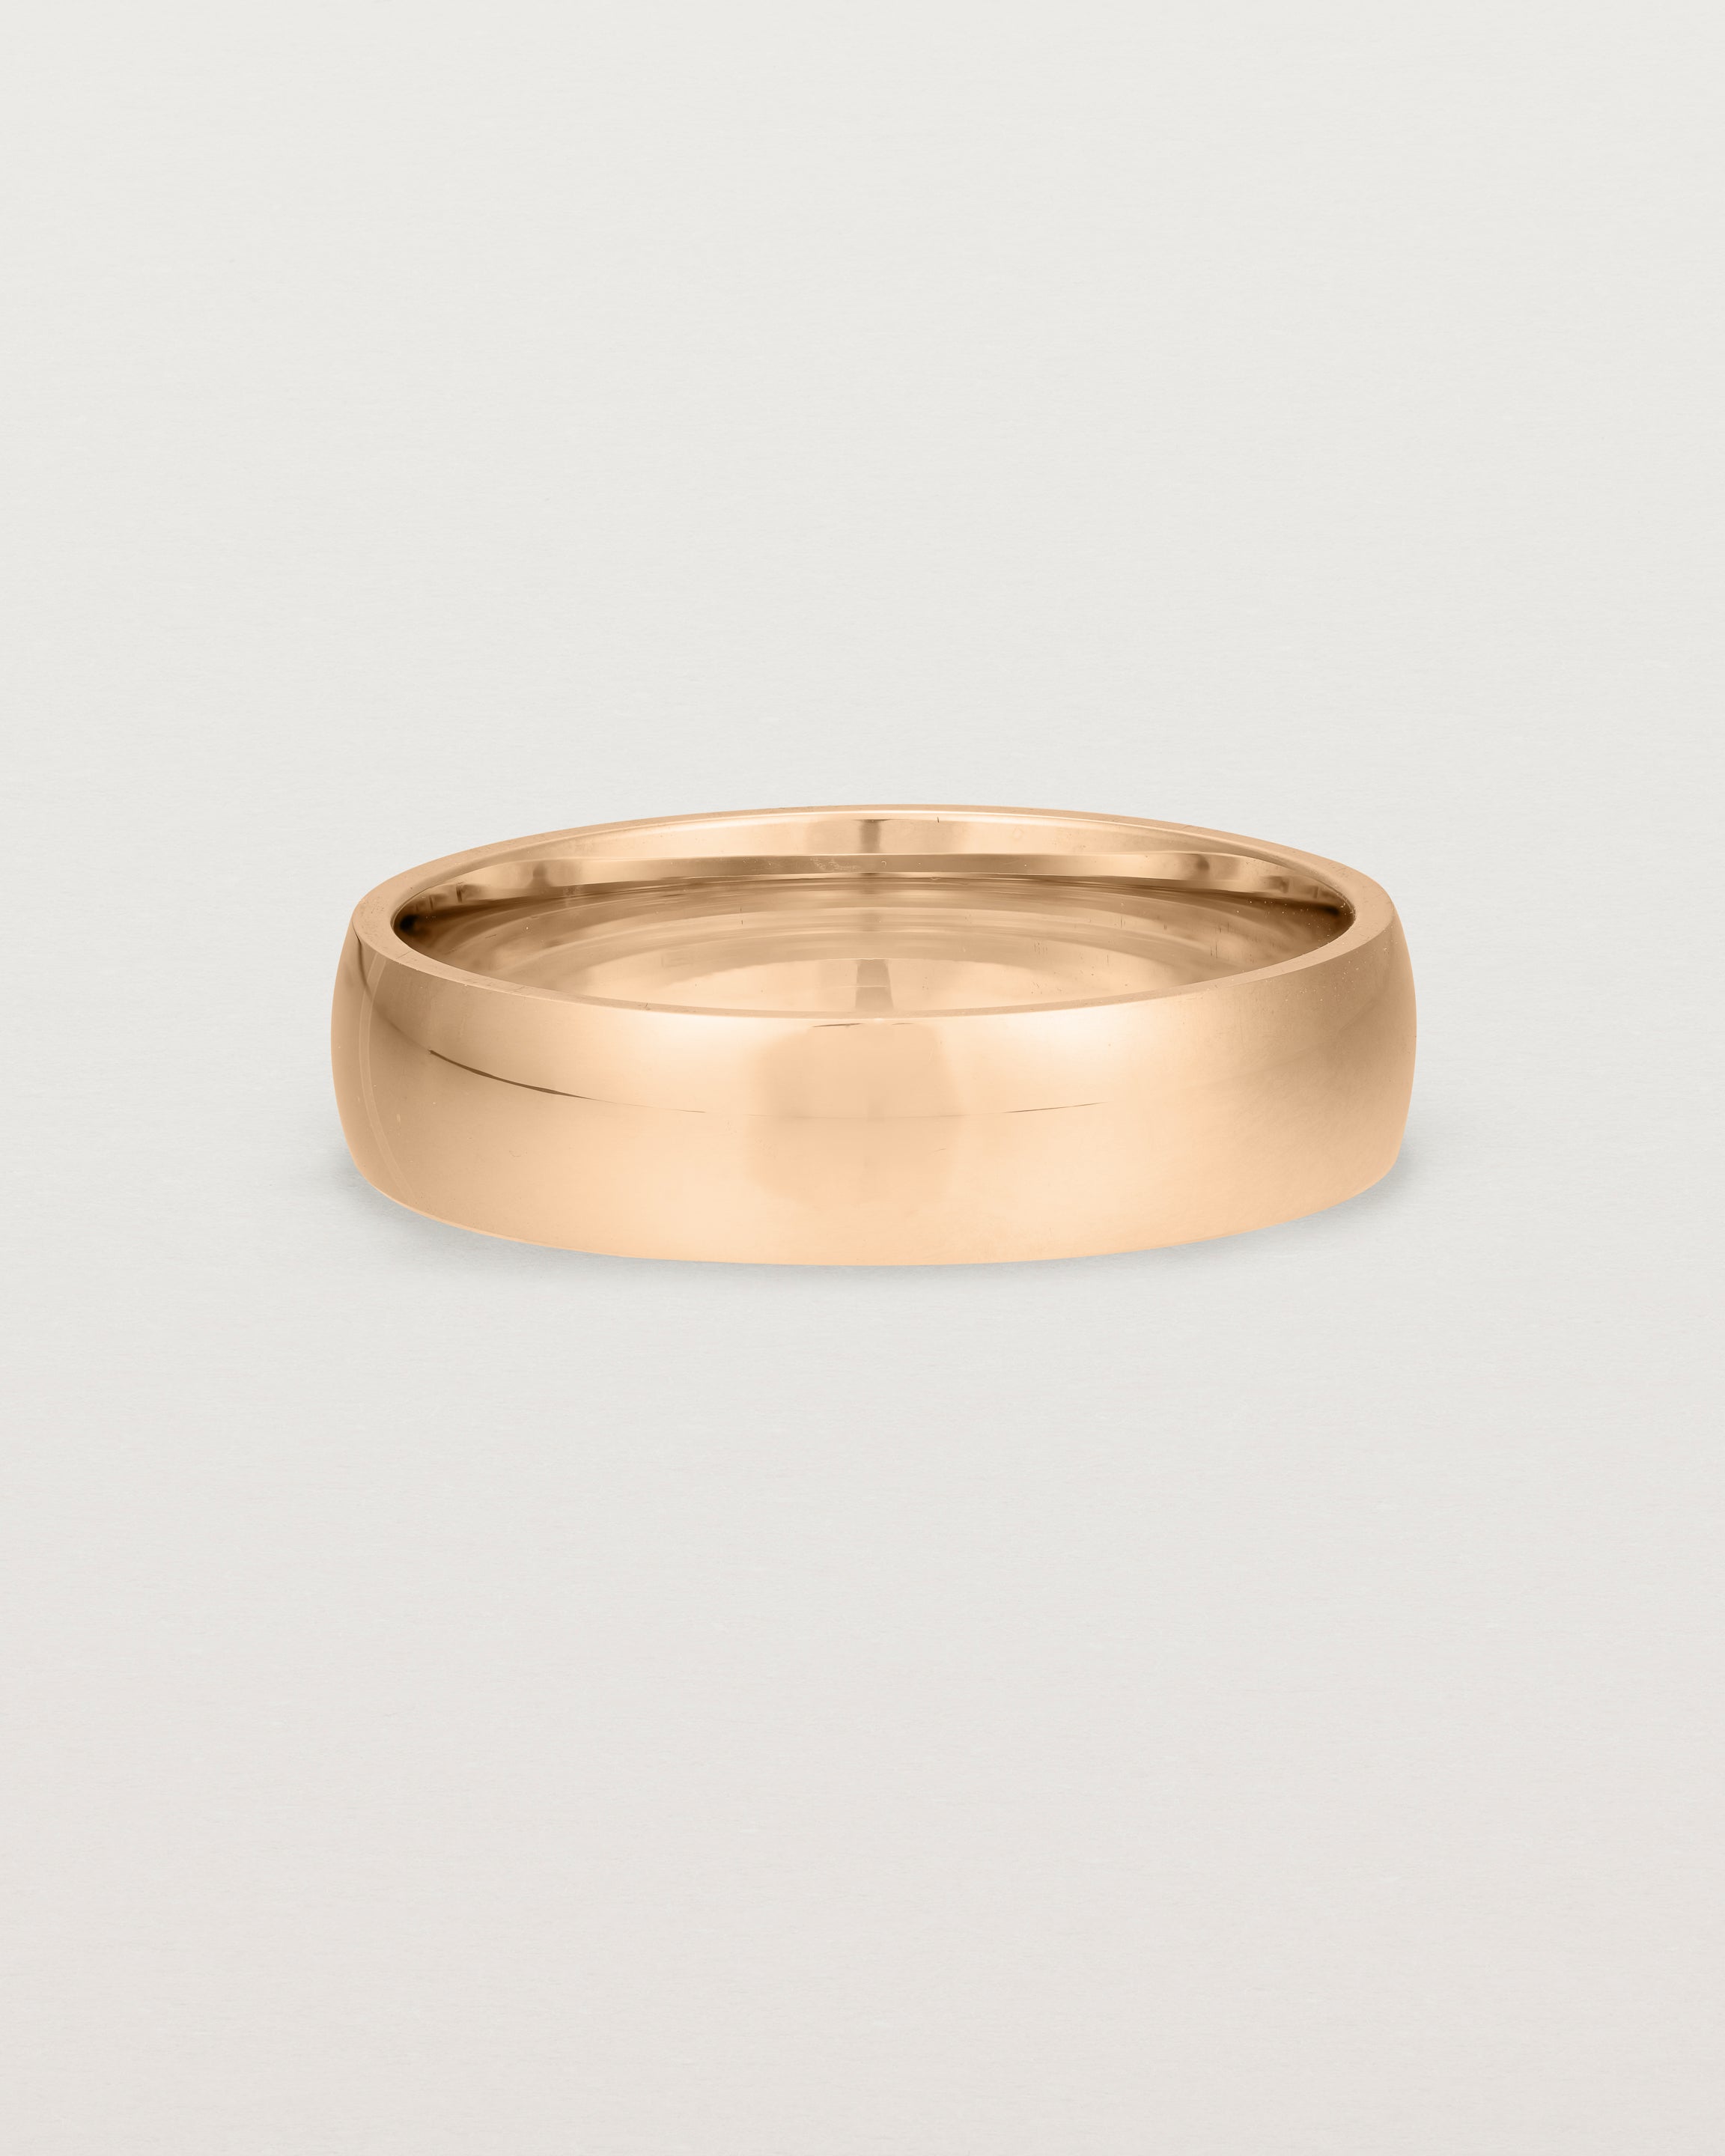 The front view of a 5mm wide heavy wedding ring in rose gold. 